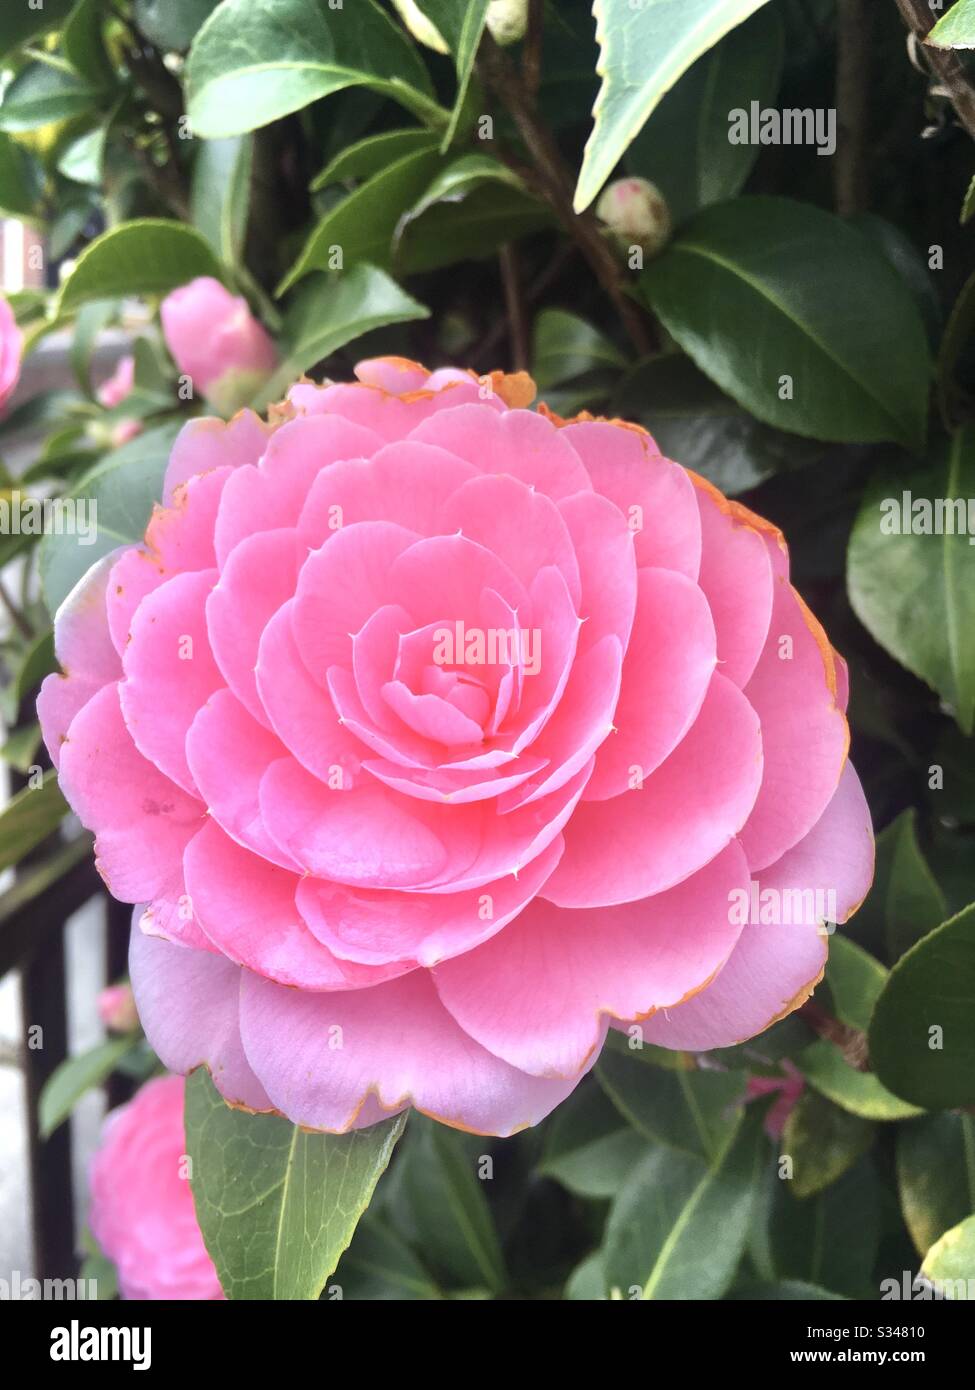 Camellia plant pink flowers Stock Photo